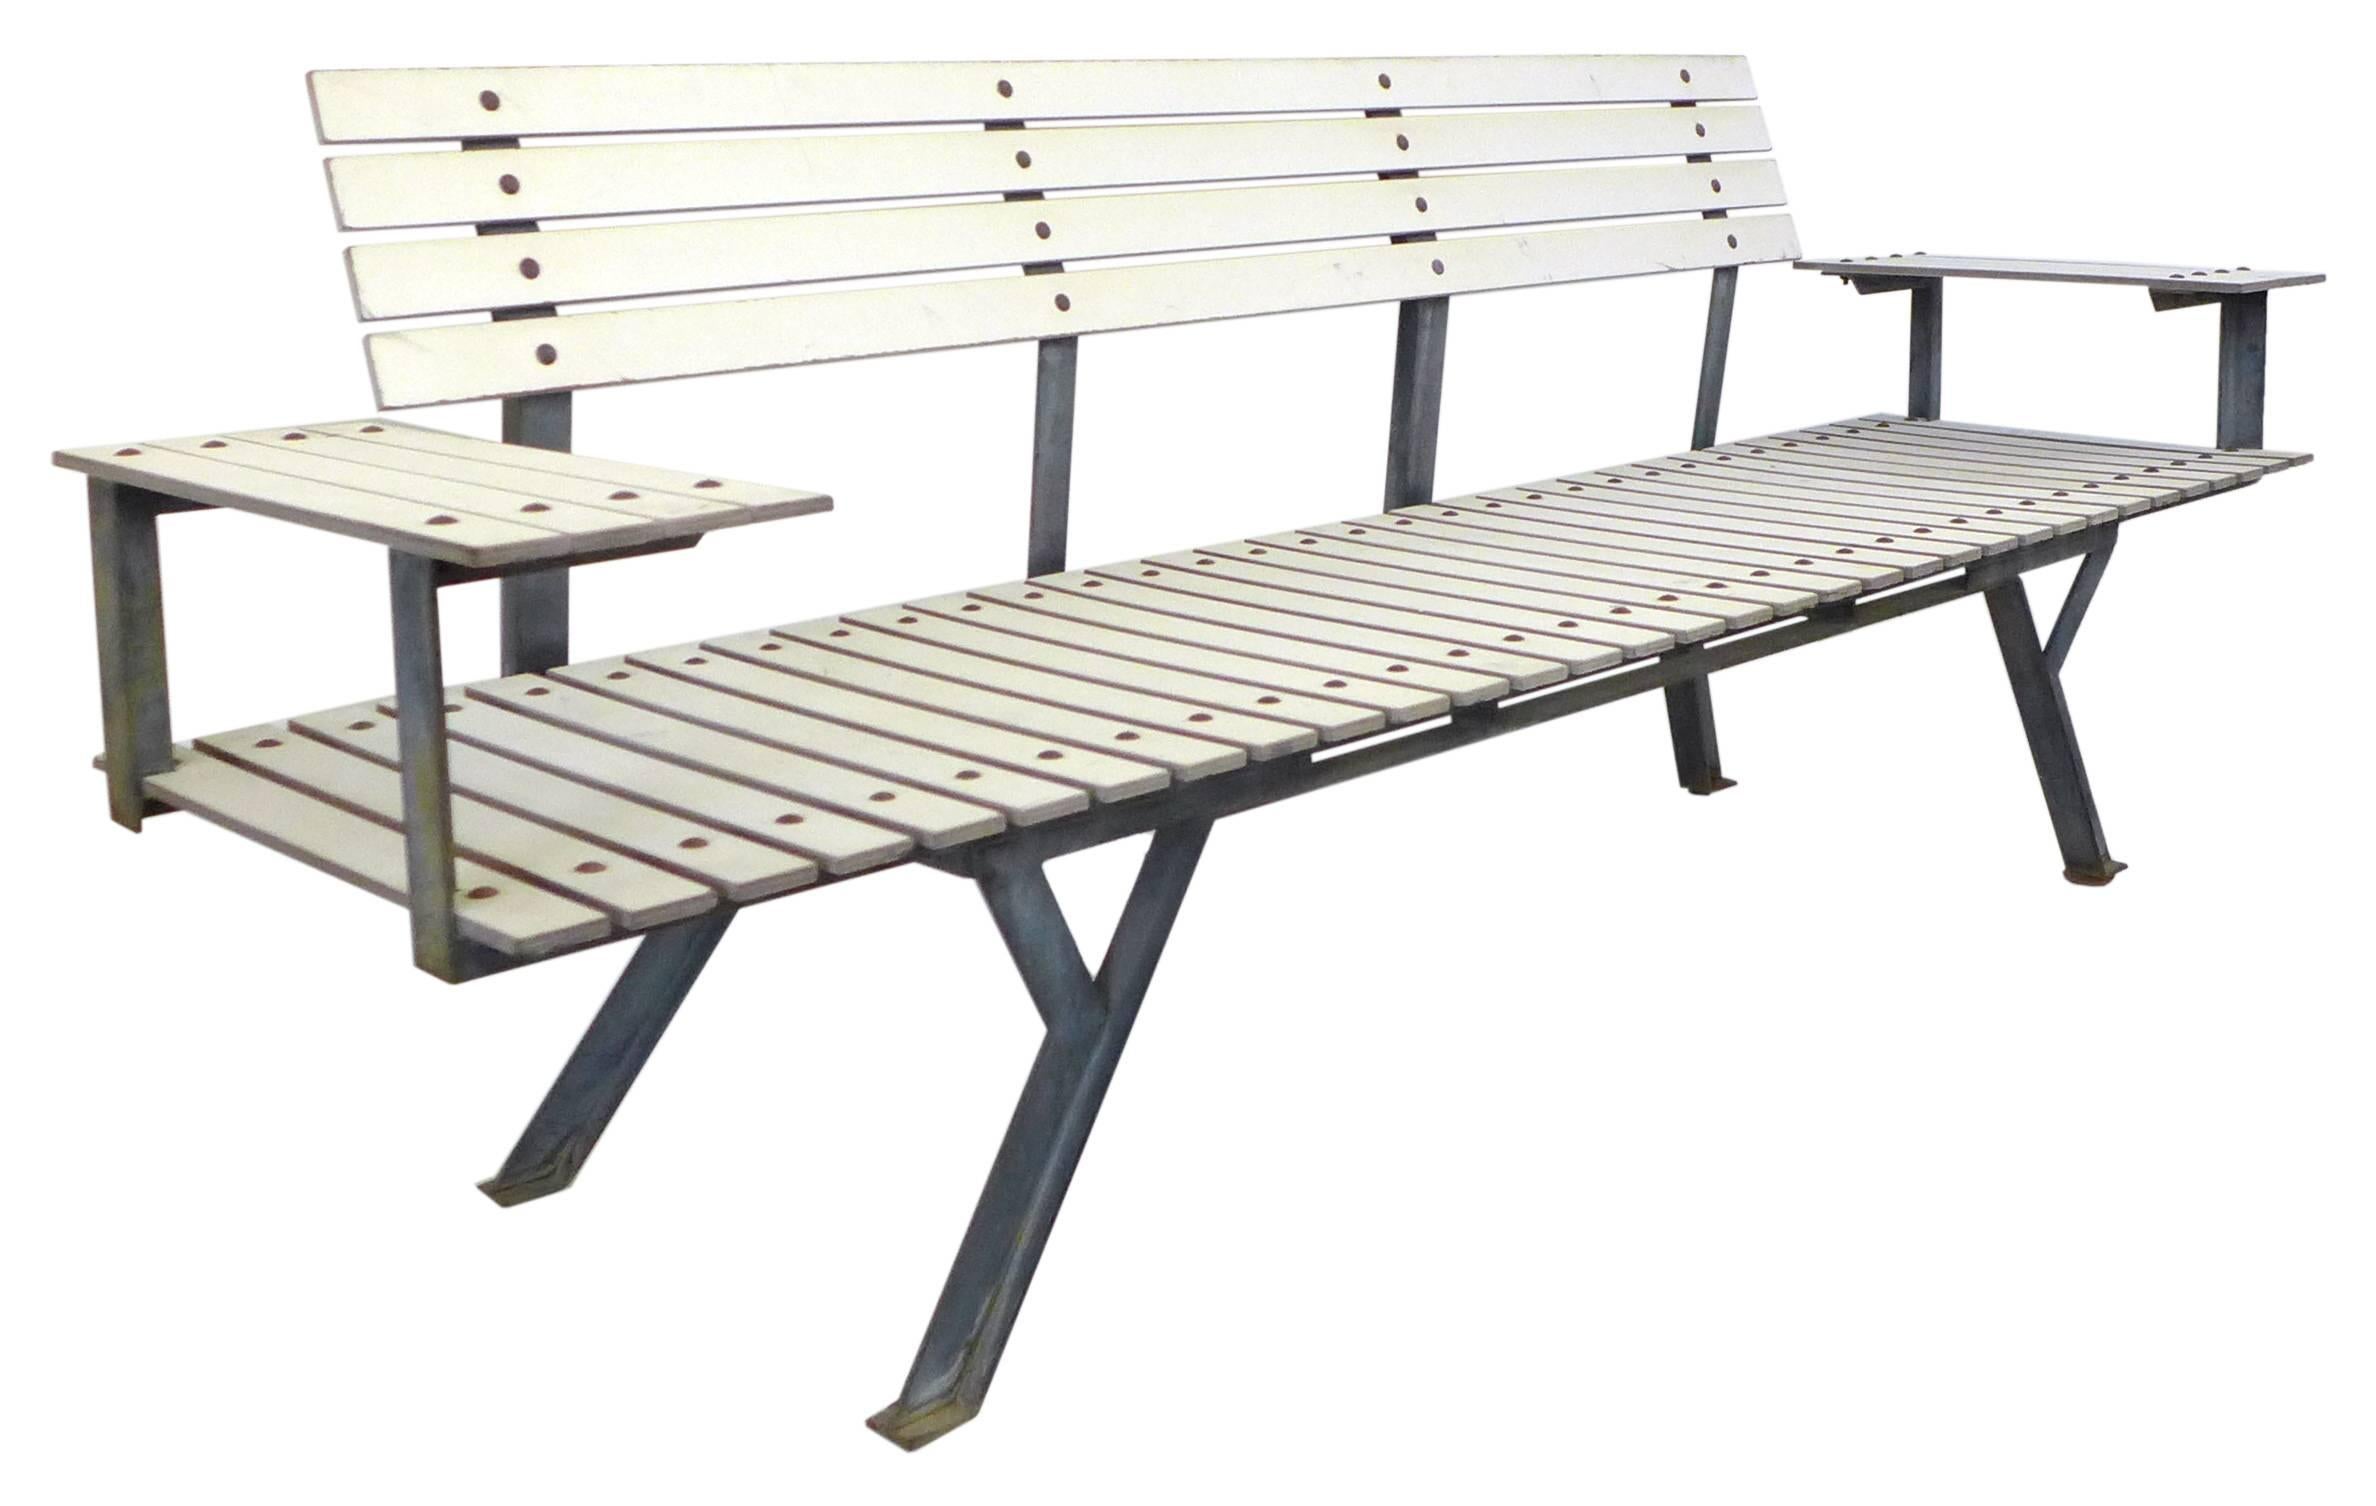 A very unusual and architecturally inspired slat bench of steel and painted wood slats. An extremely interesting and angular leg structure and frame system support a graphically powerful yet simple pattern of wooden slats. Two floating and slatted